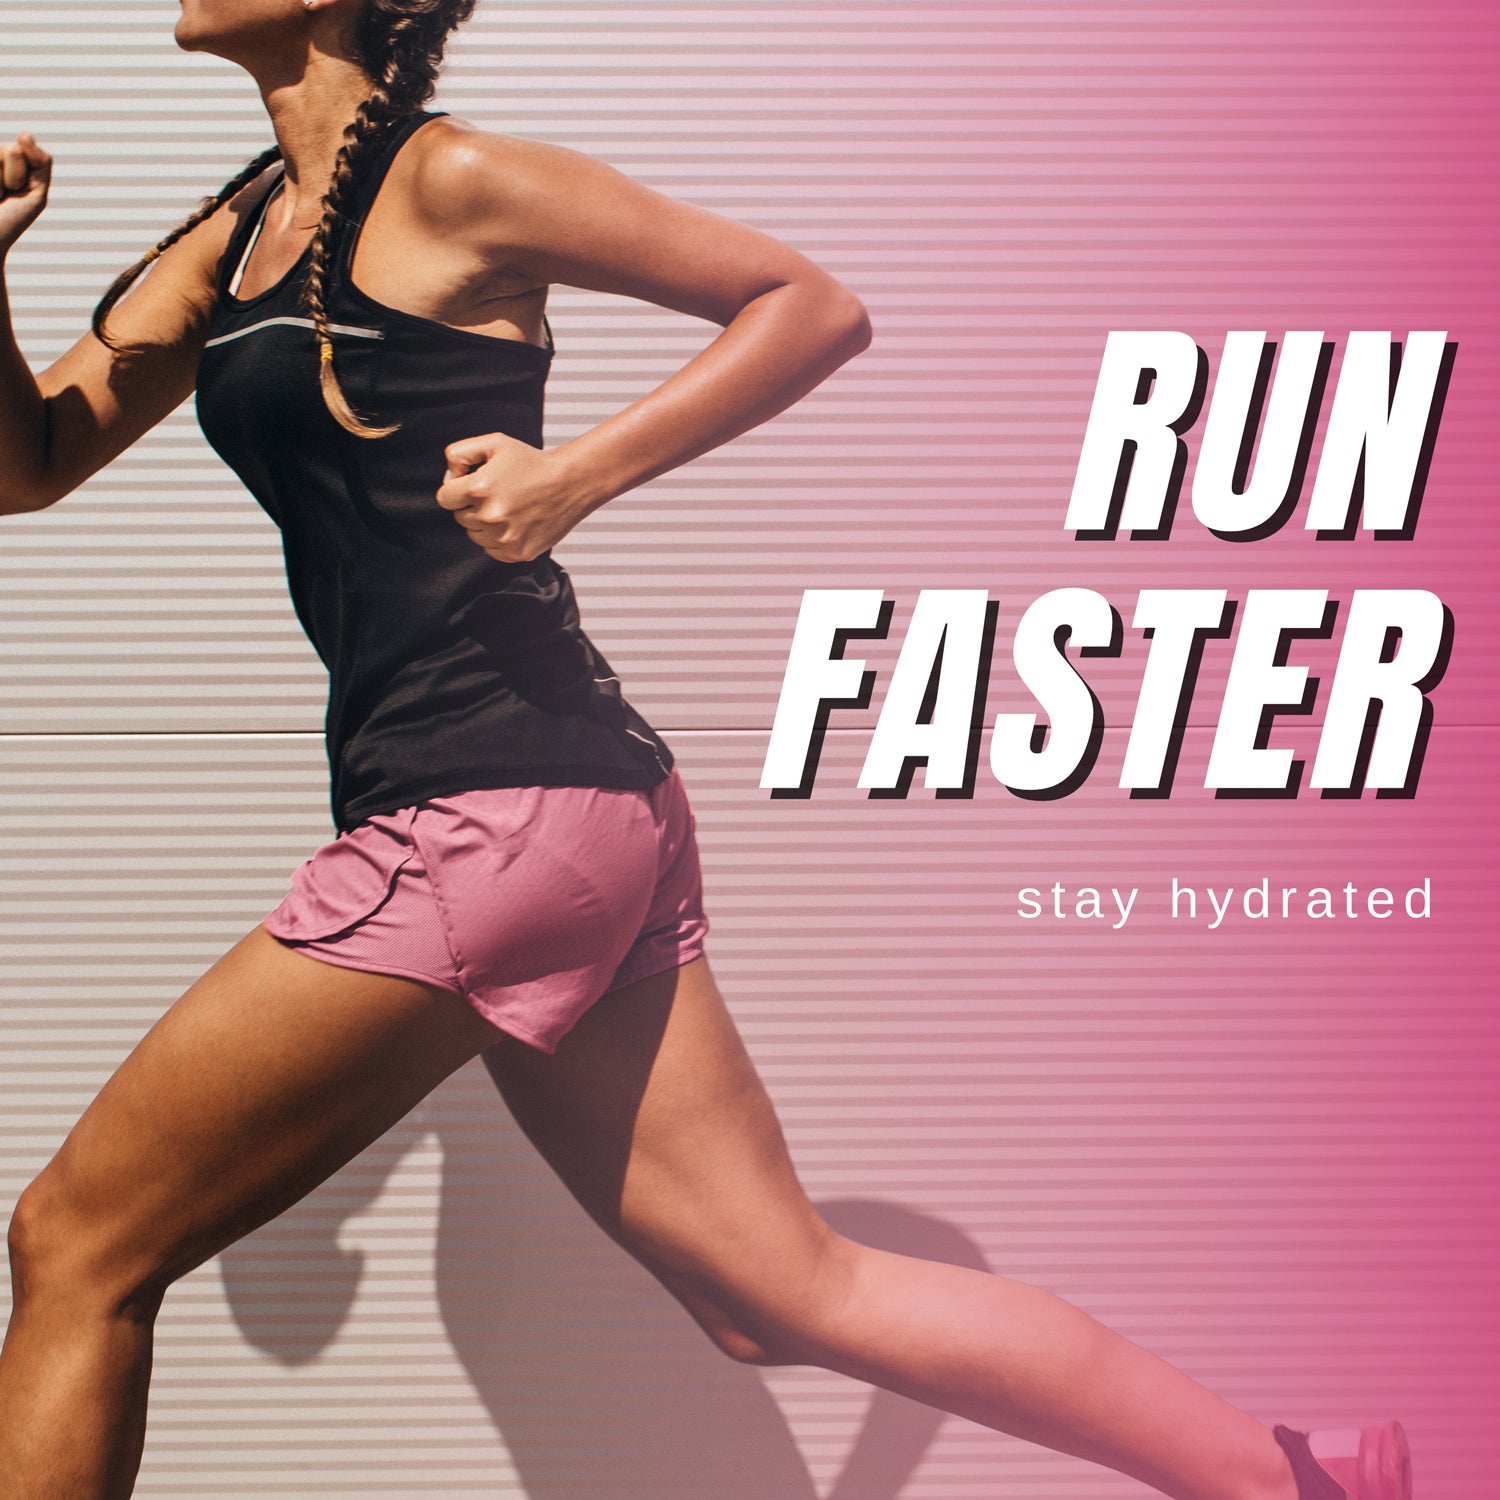 Attention Runners: 3 Tips to Stay Hydrated